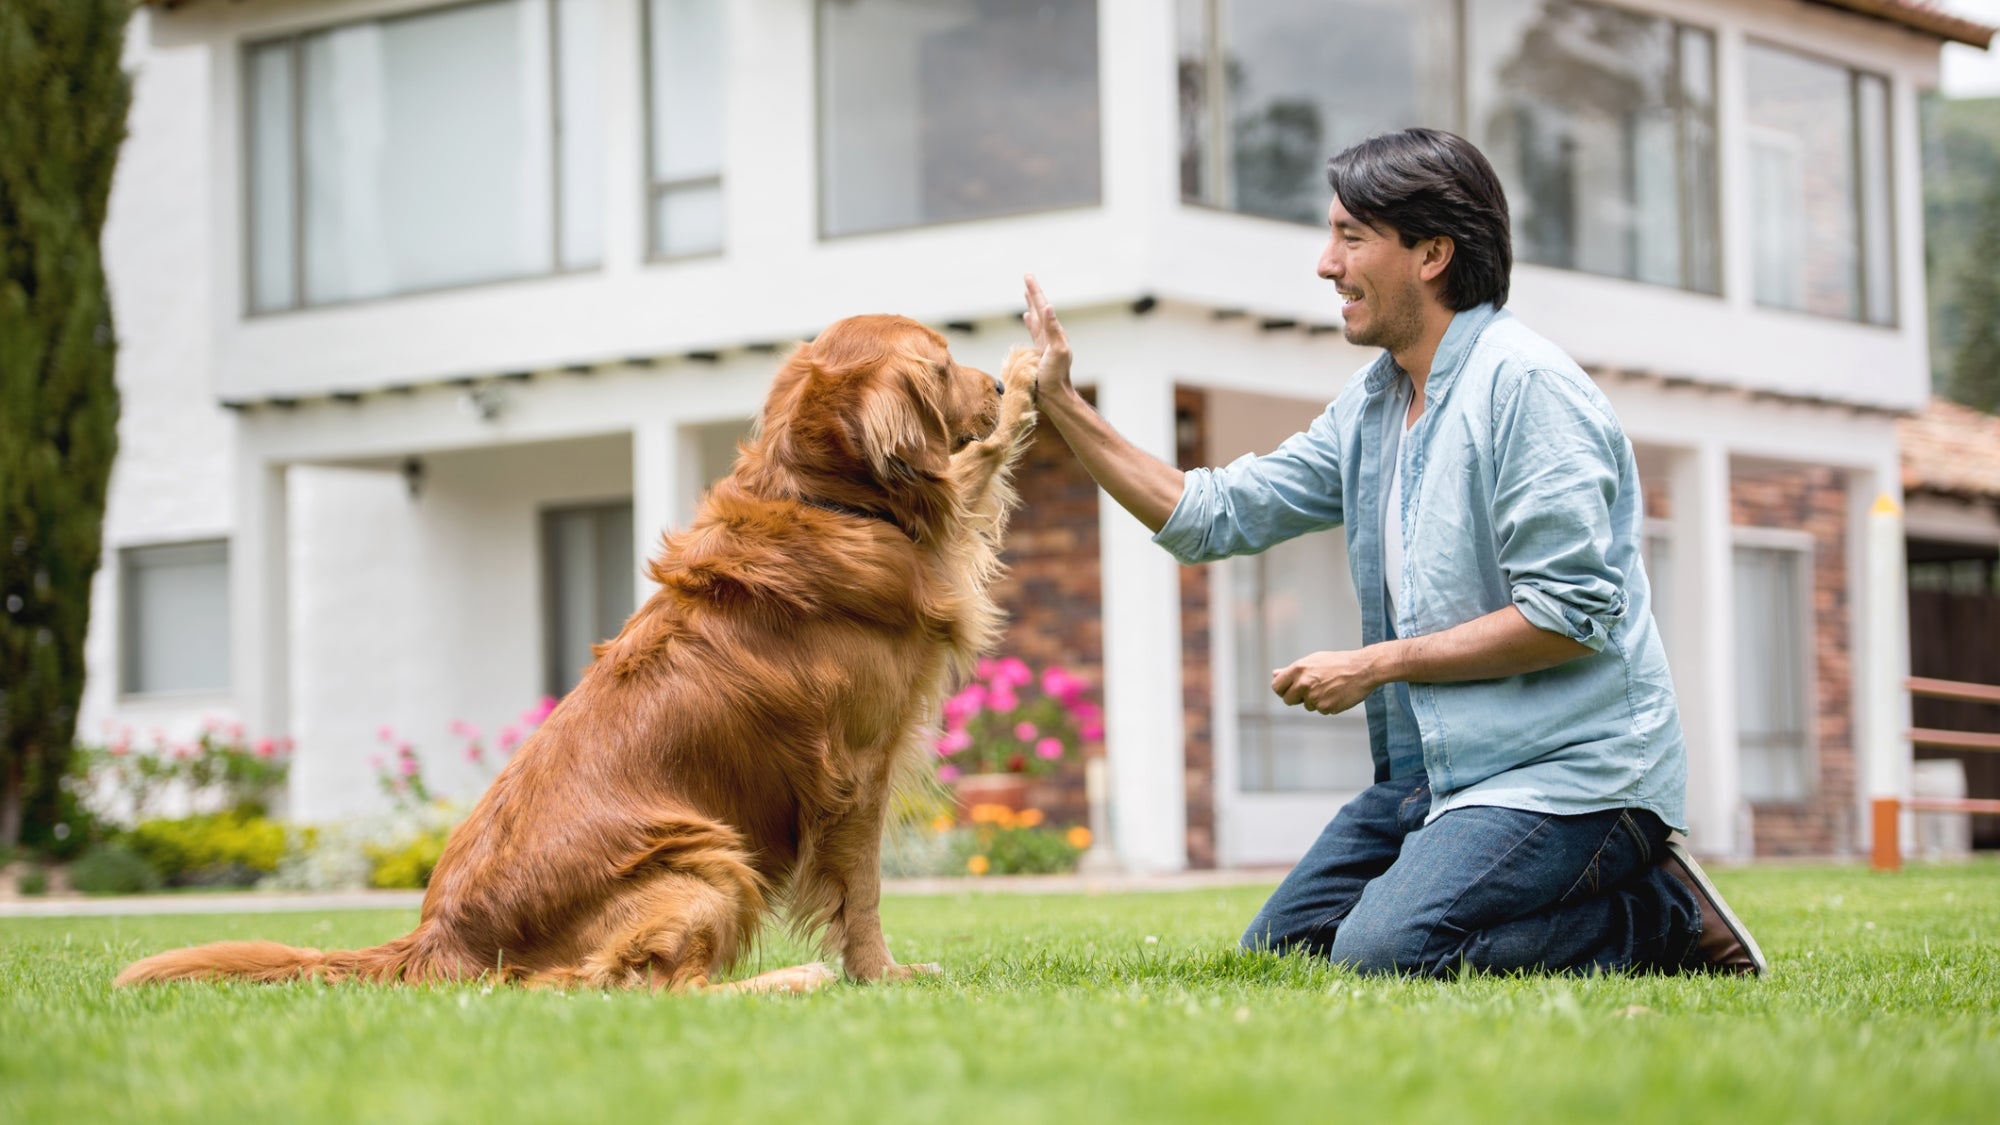 How much do dog trainer business owners make?